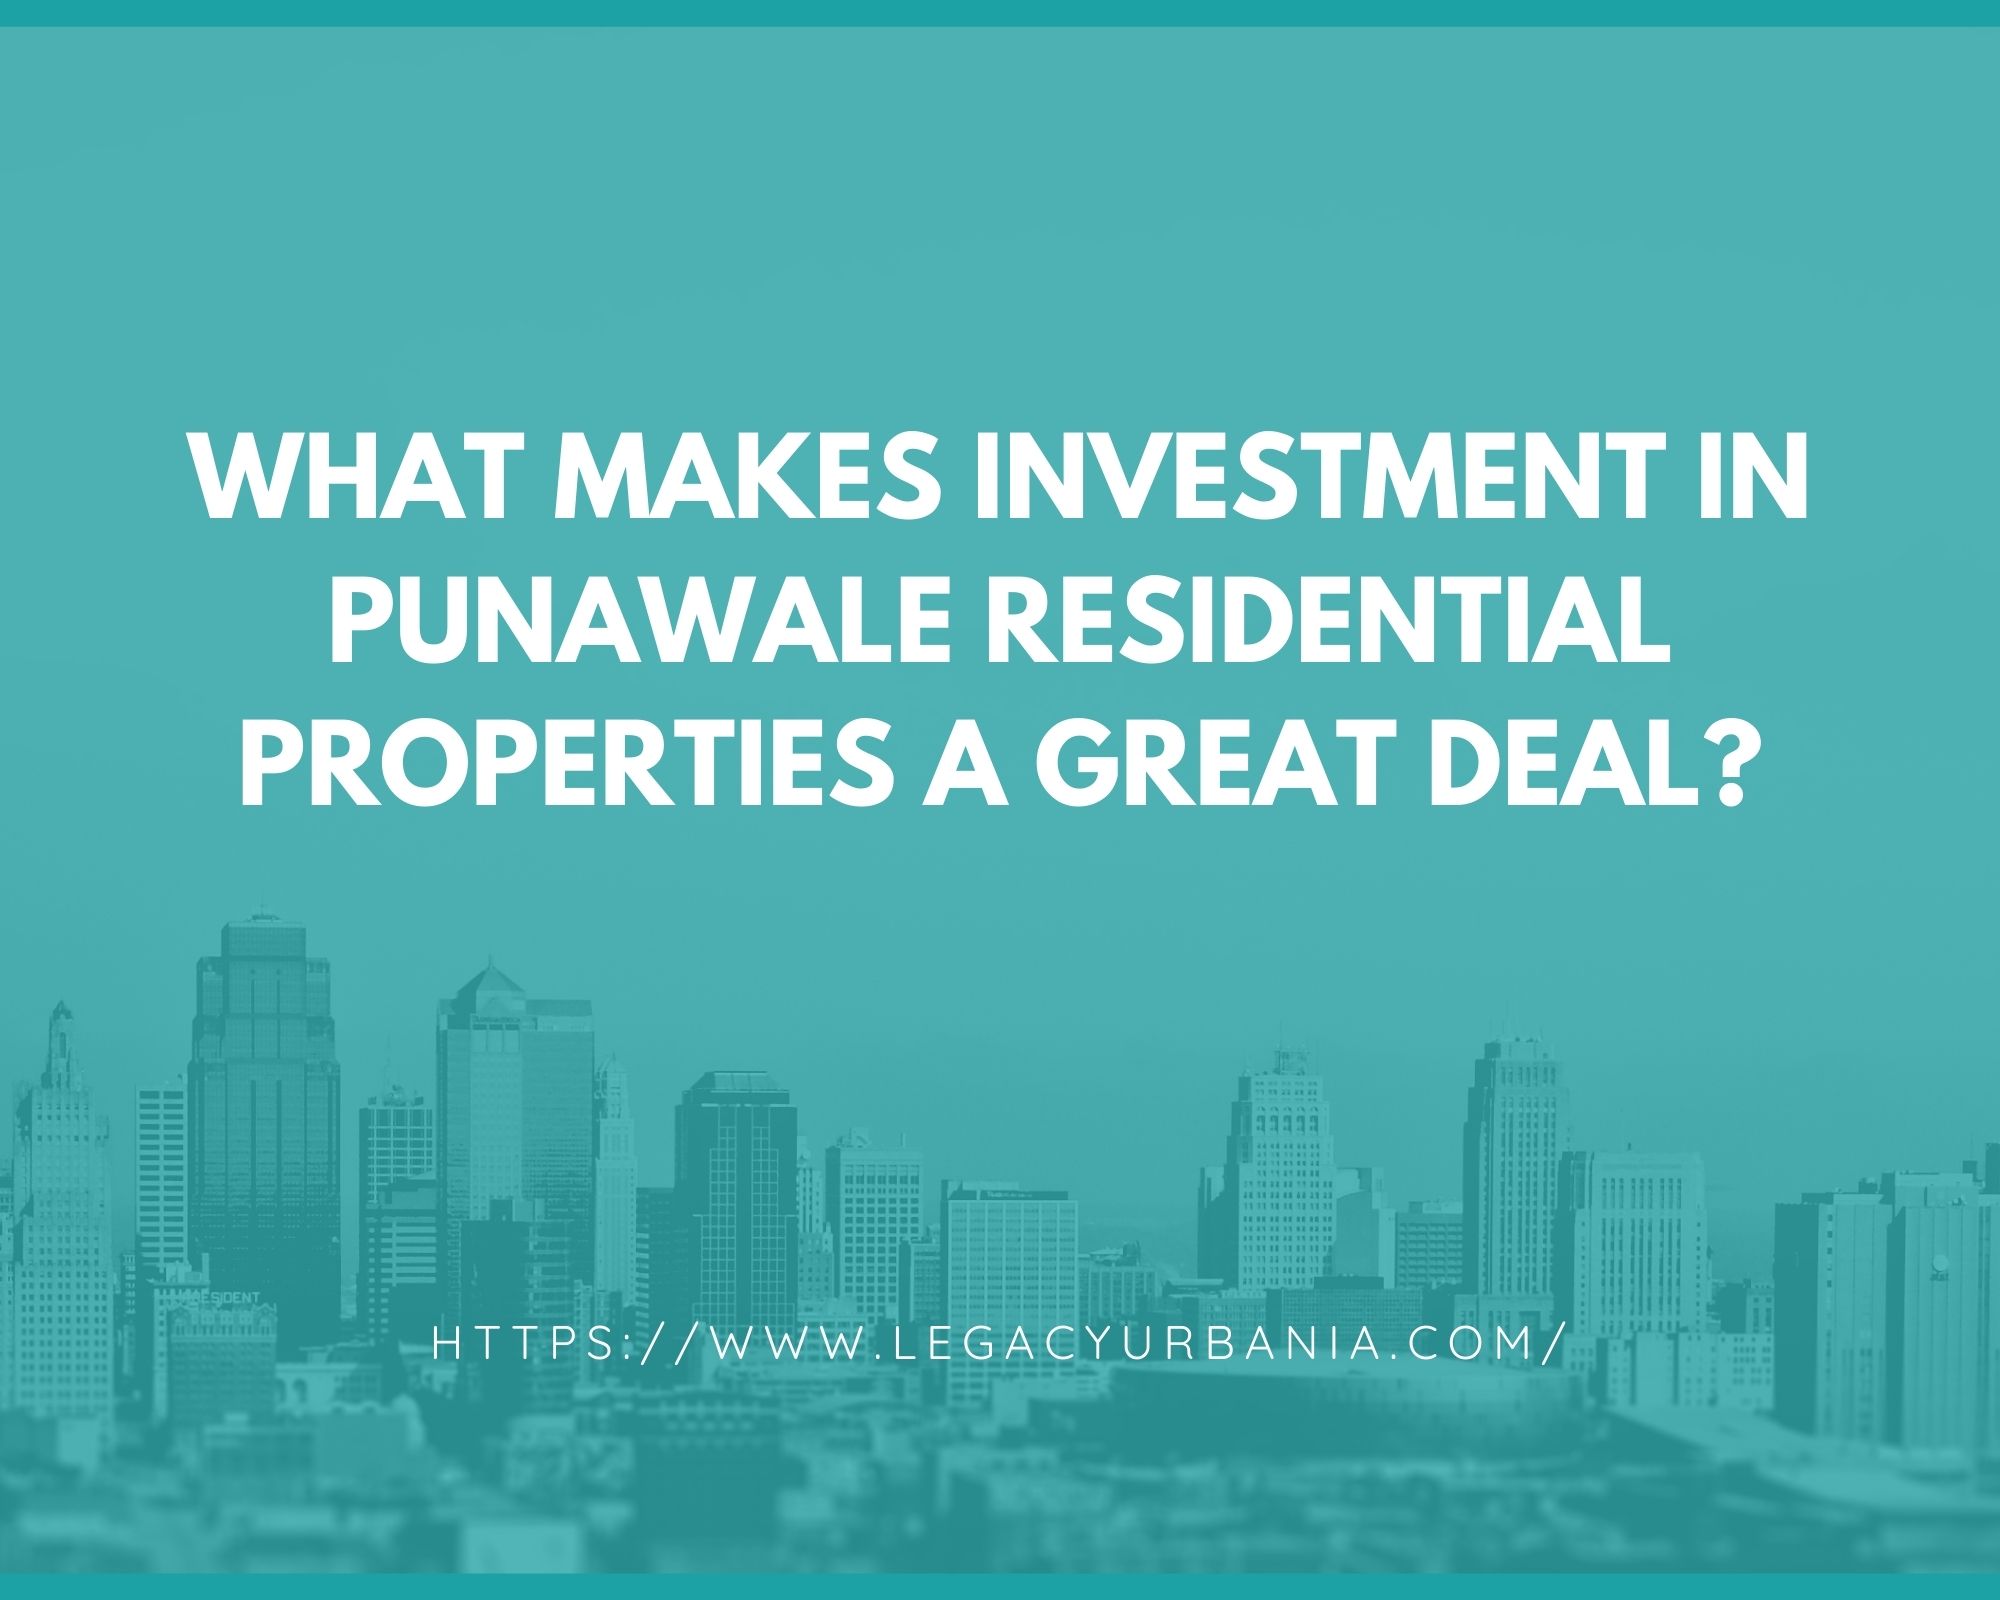 What makes investment in Punawale residential properties a great deal?